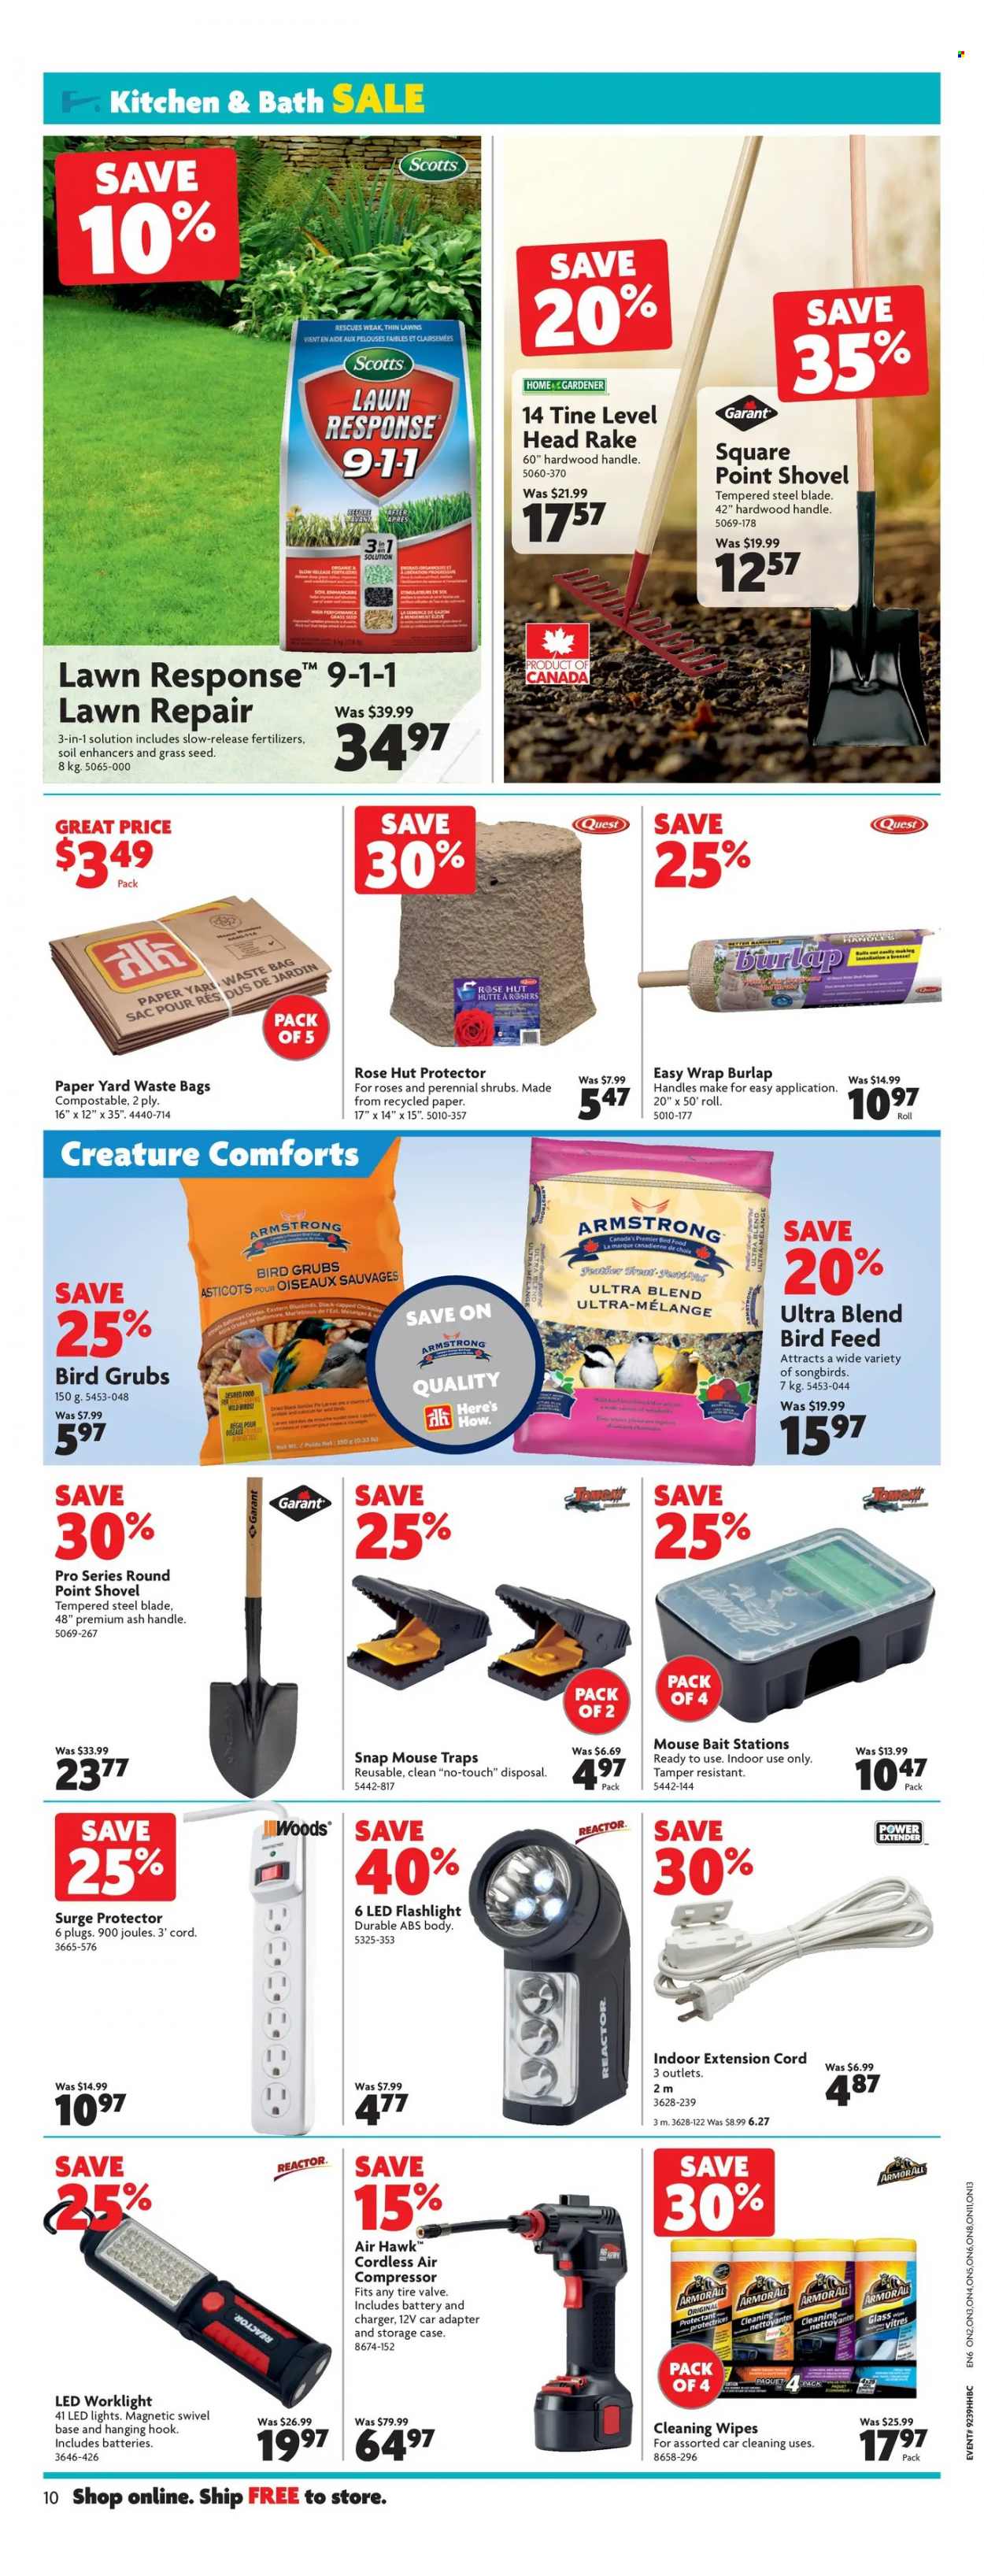 thumbnail - Home Hardware Building Centre Flyer - September 30, 2021 - October 06, 2021 - Sales products - cleansing wipes, wipes, bag, trash bags, waste bag, LED light, surge, surge protector, shovel, air compressor, extension cord, plant seeds, rose, grass seed. Page 12.